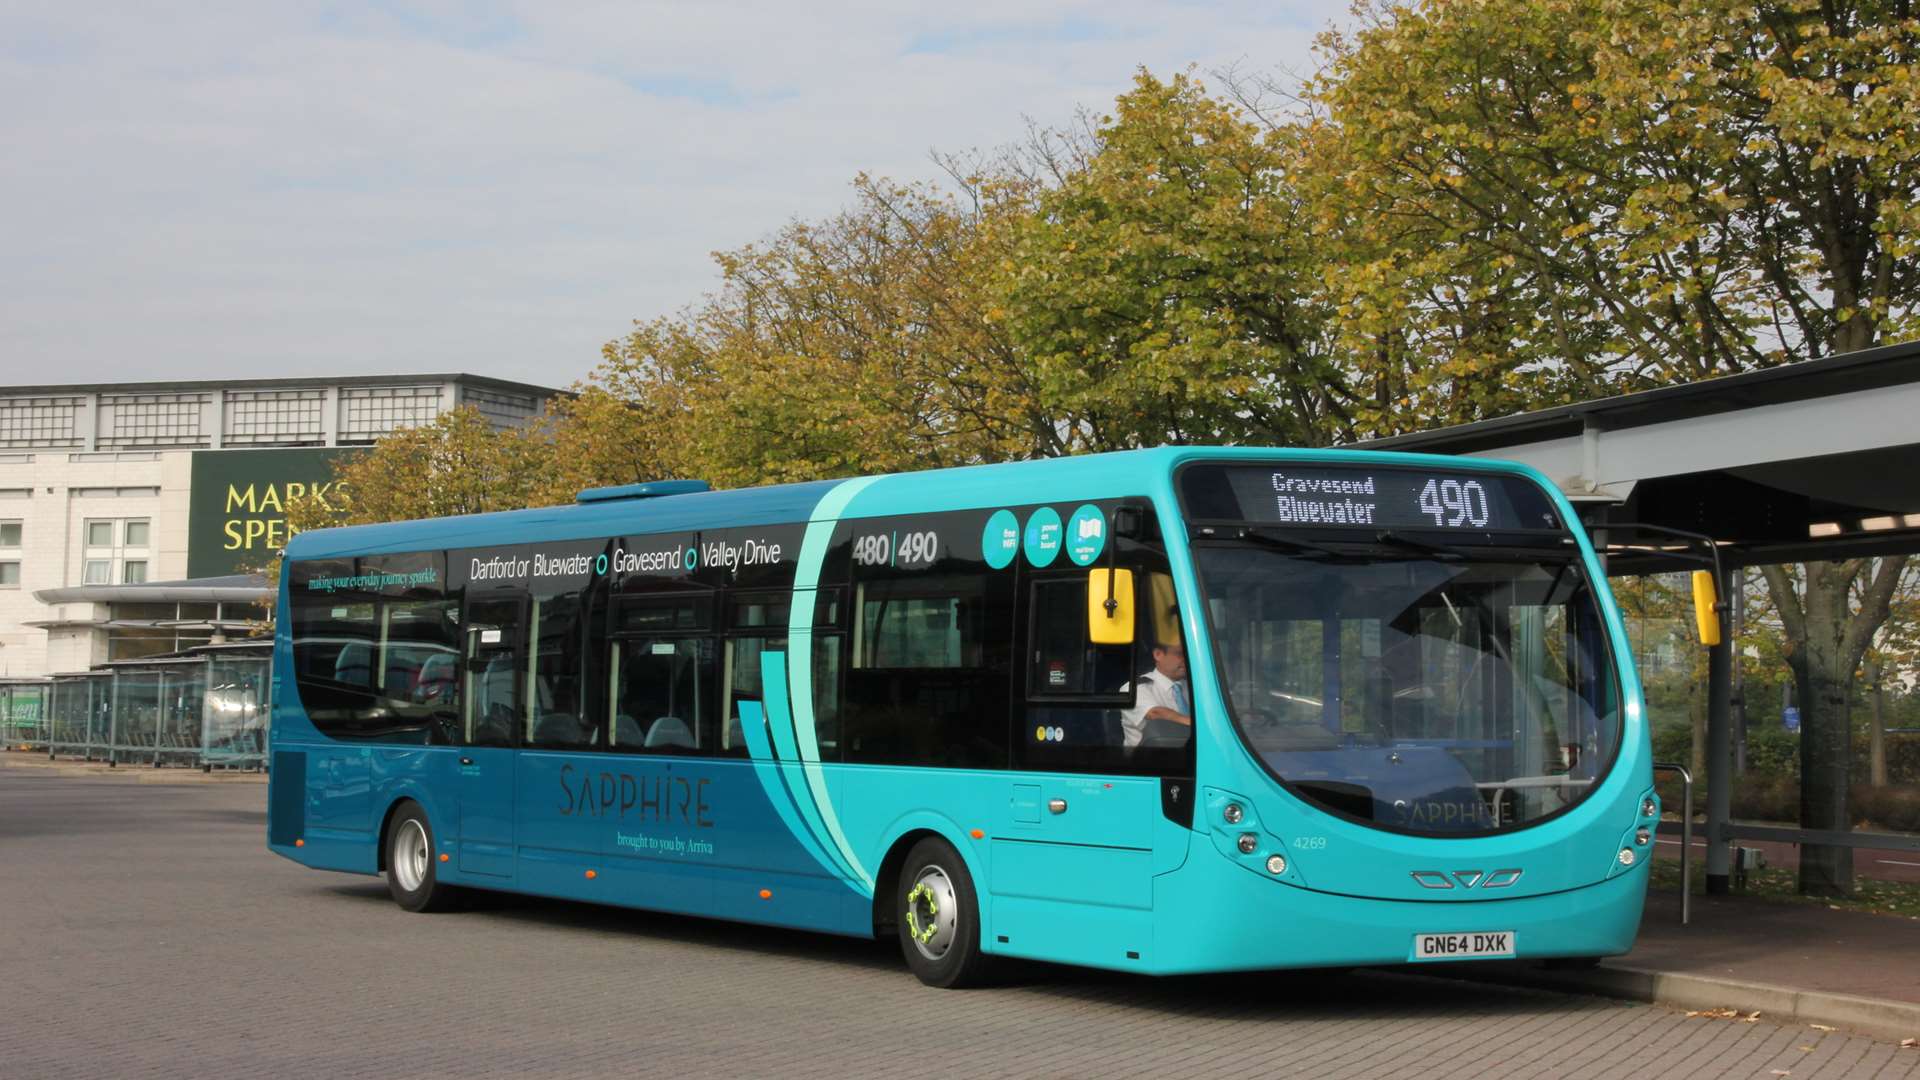 Arriva is under fire for the changes